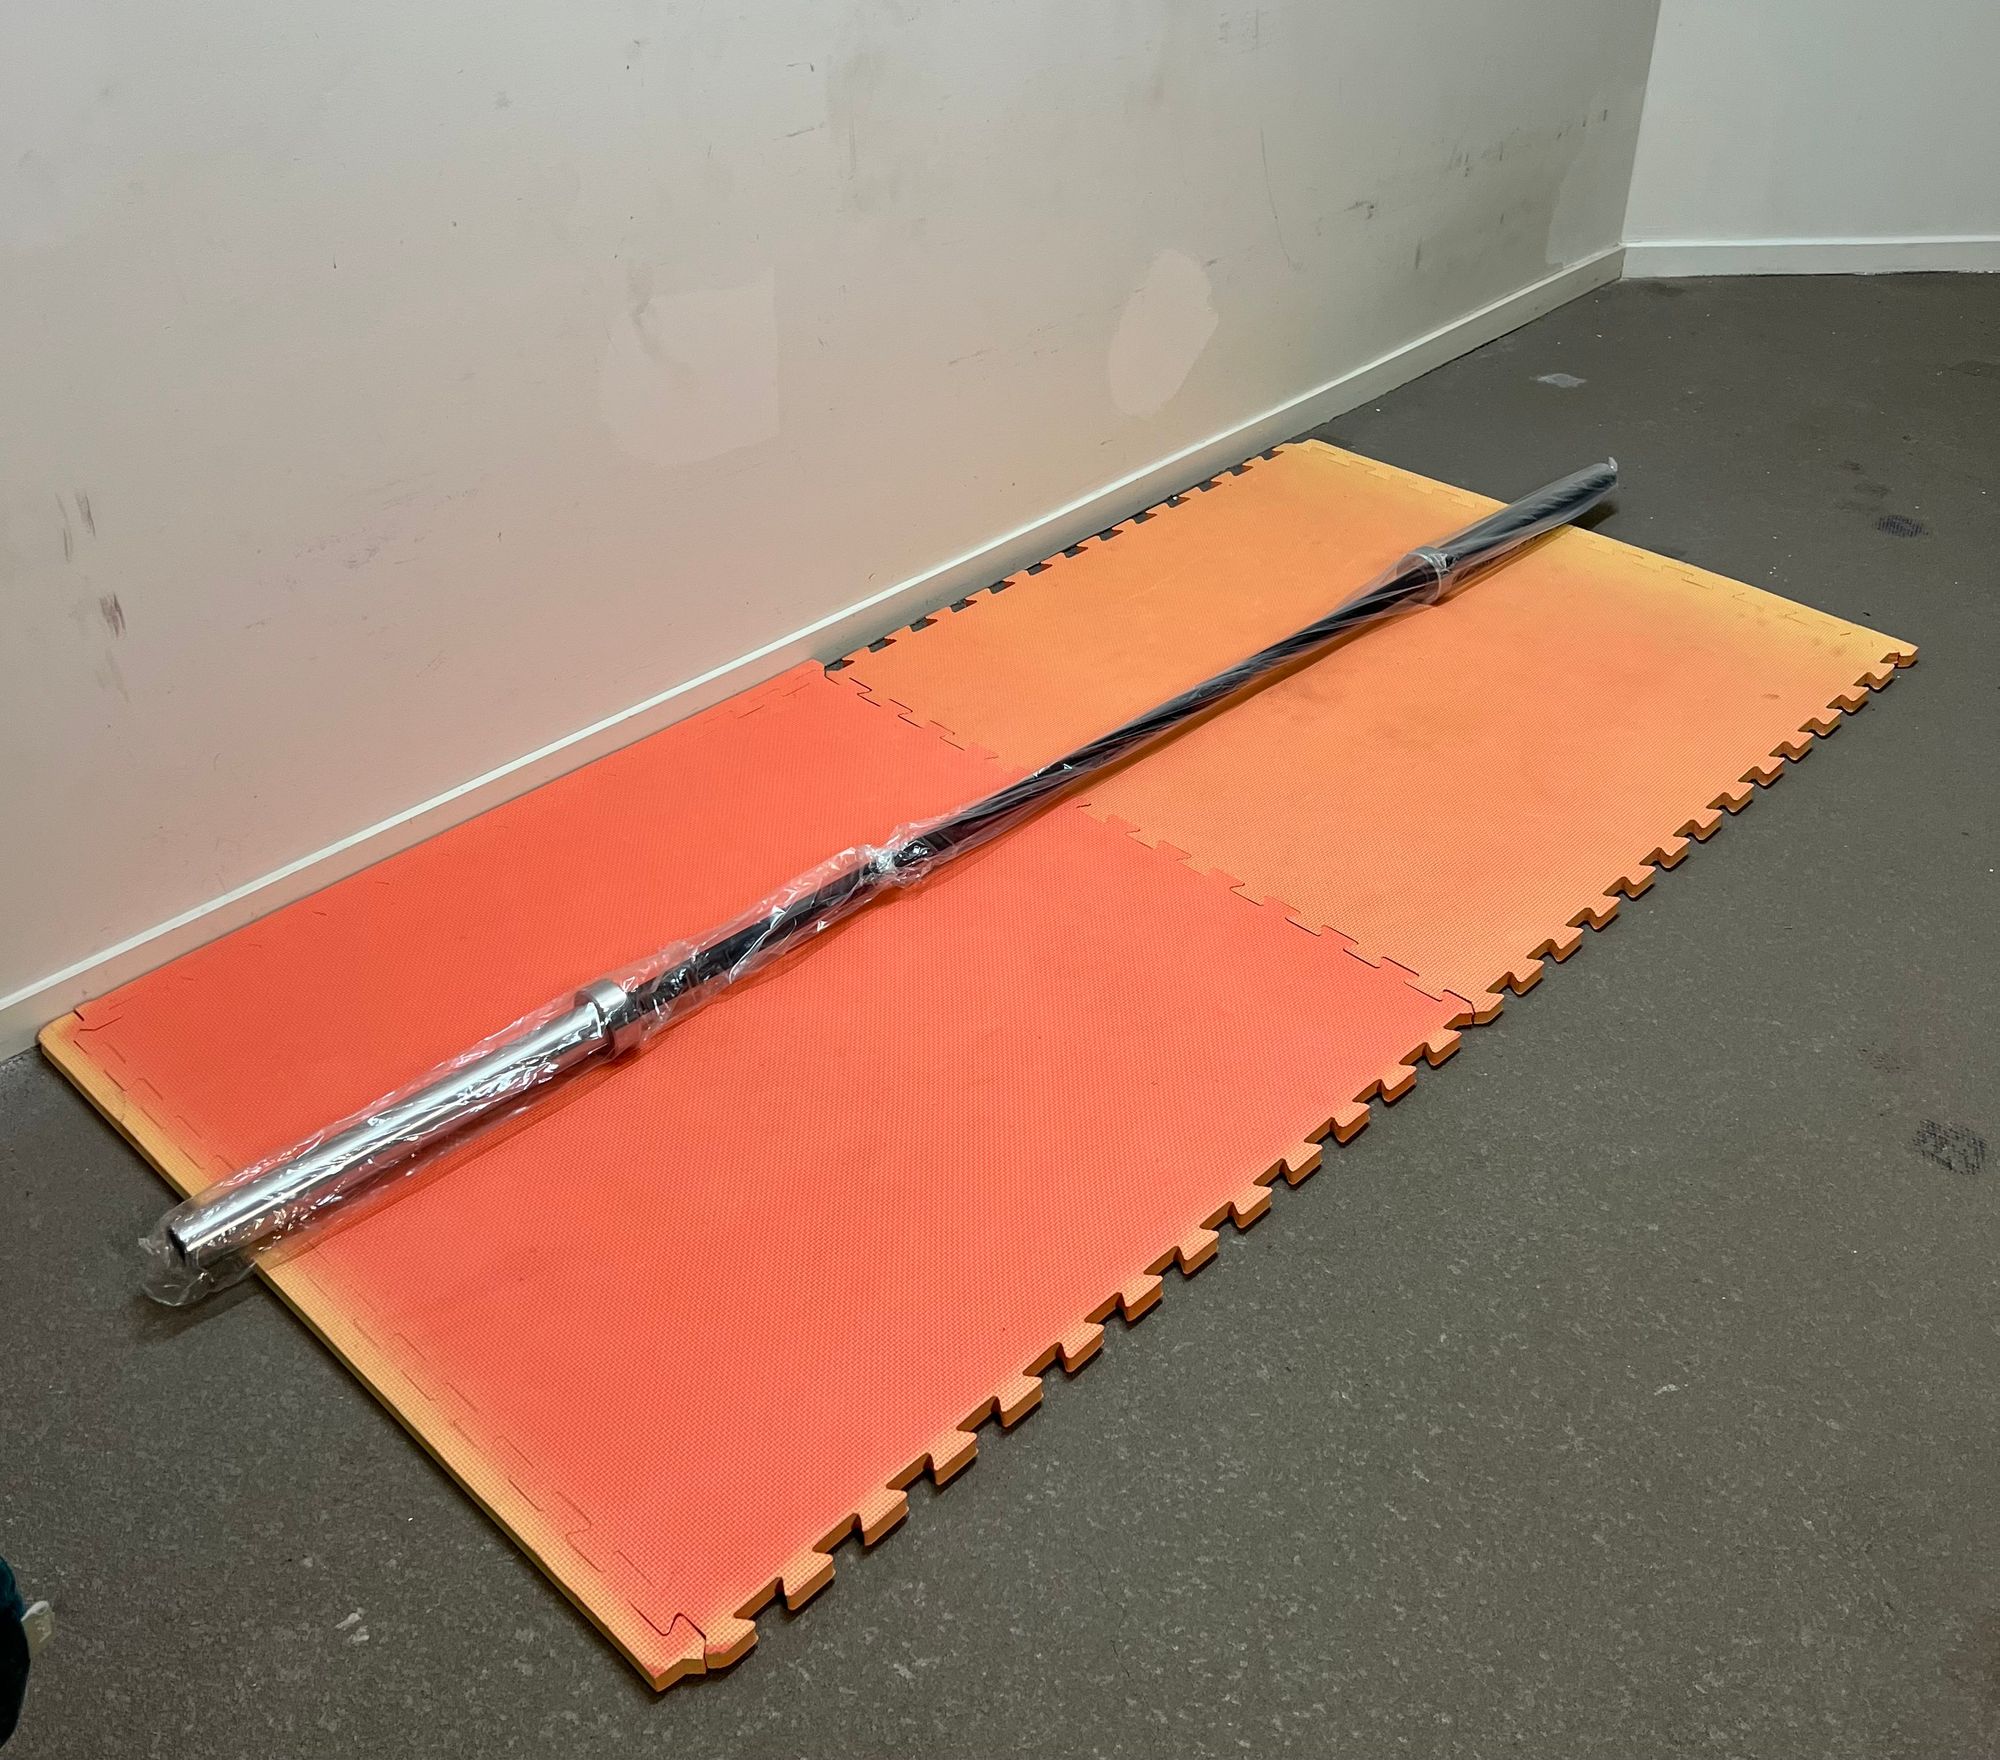 Weightlifting bar on an orange foam mat in front of a white wall